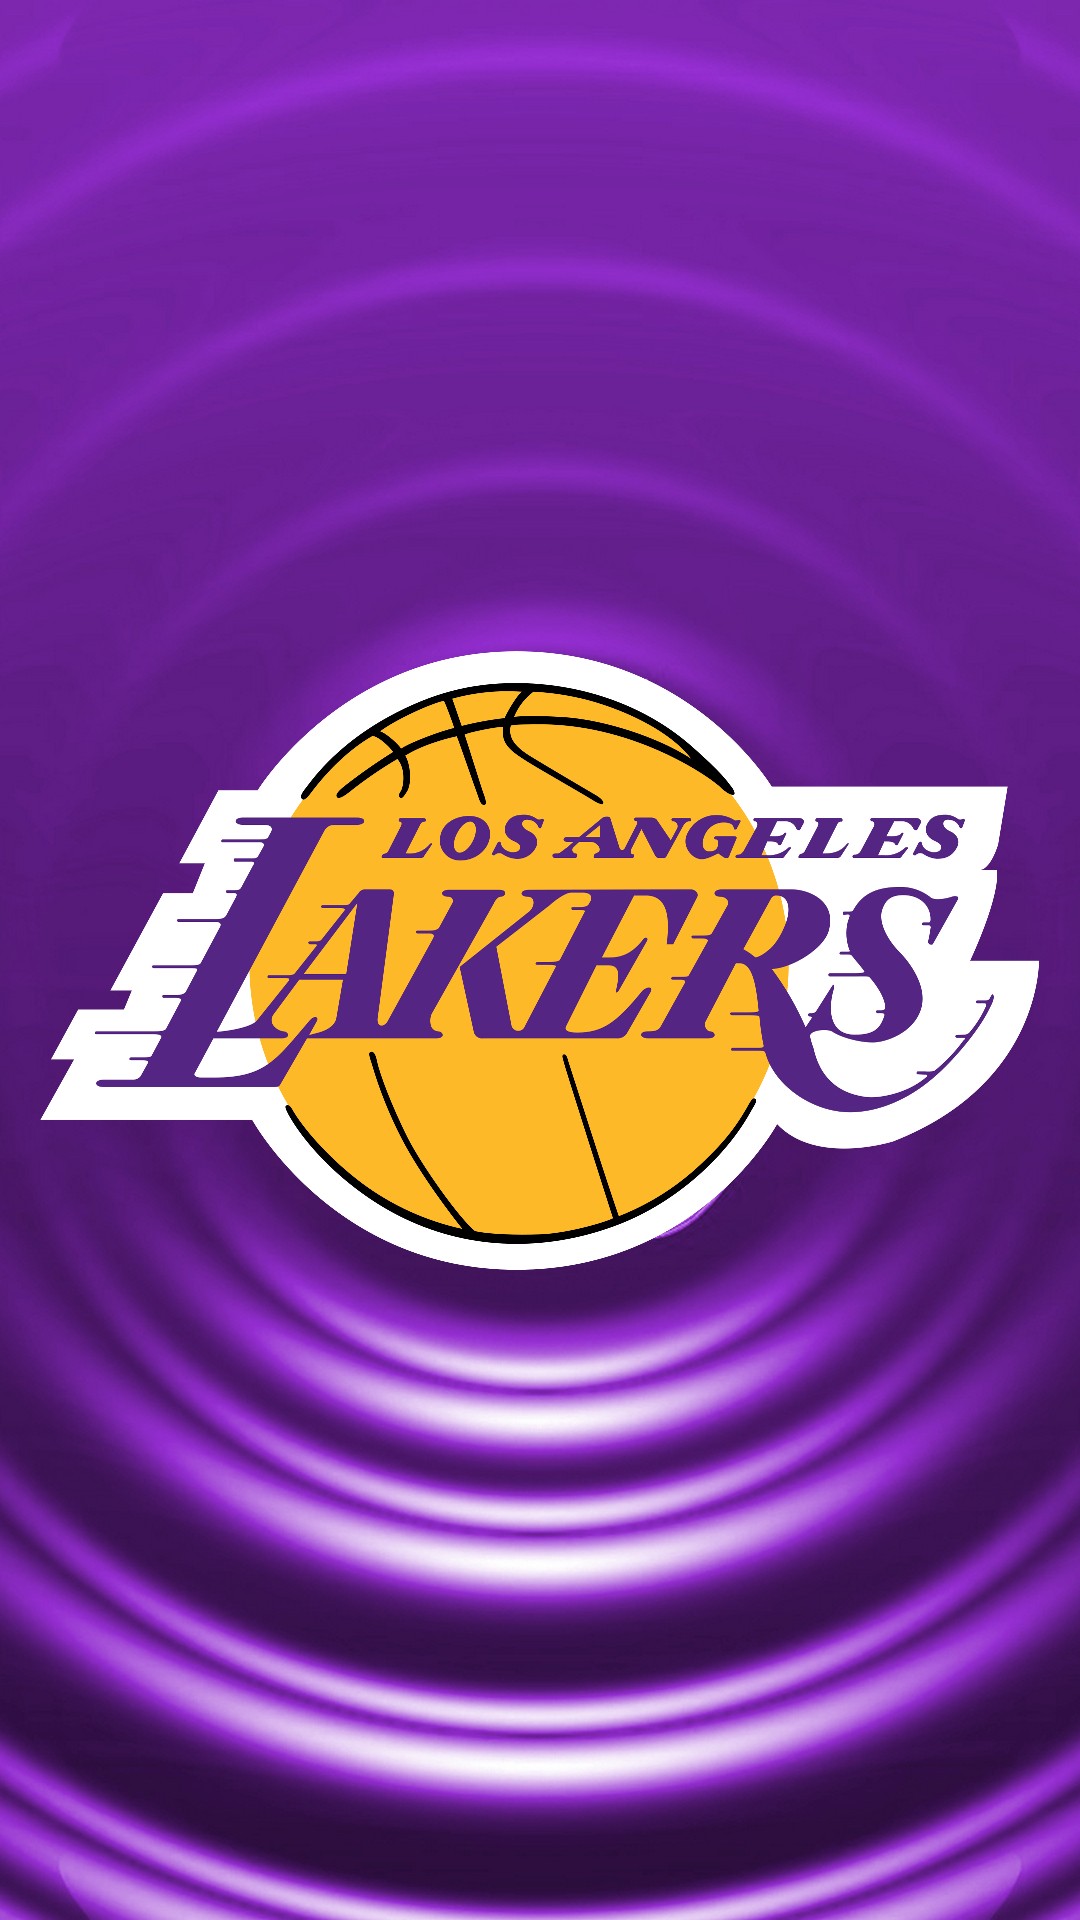 La Lakers Iphone X Wallpaper With High-resolution Pixel - HD Wallpaper 